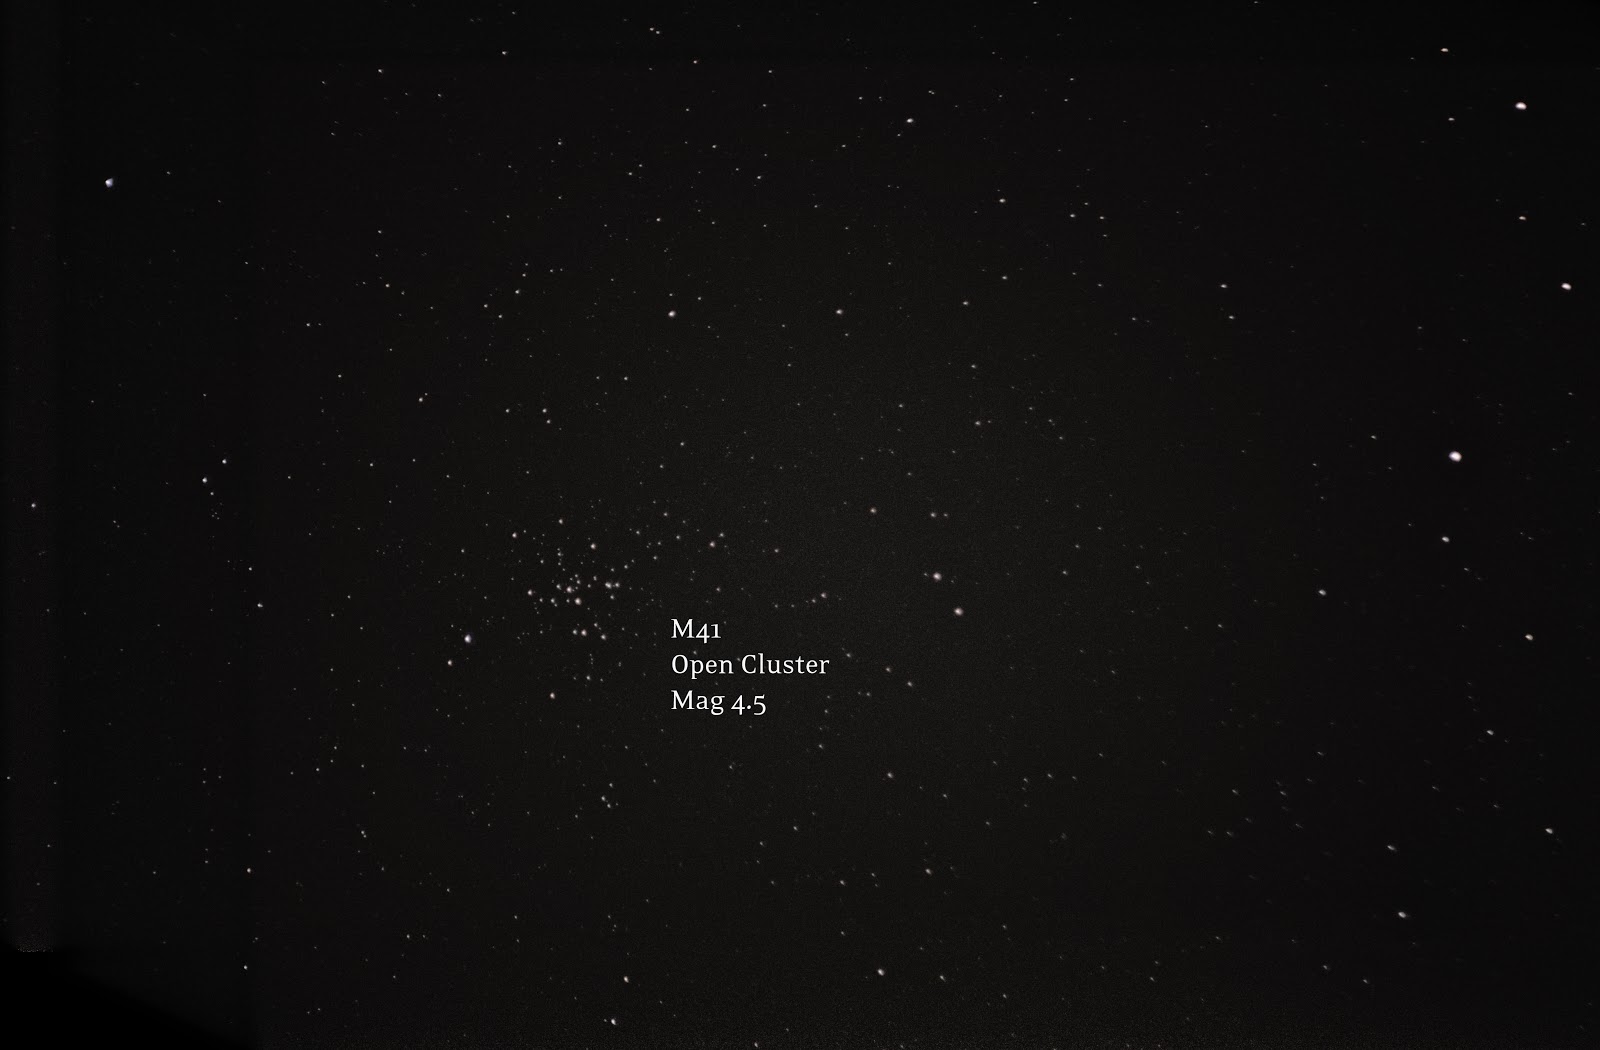 M41, open cluster in Canis Major